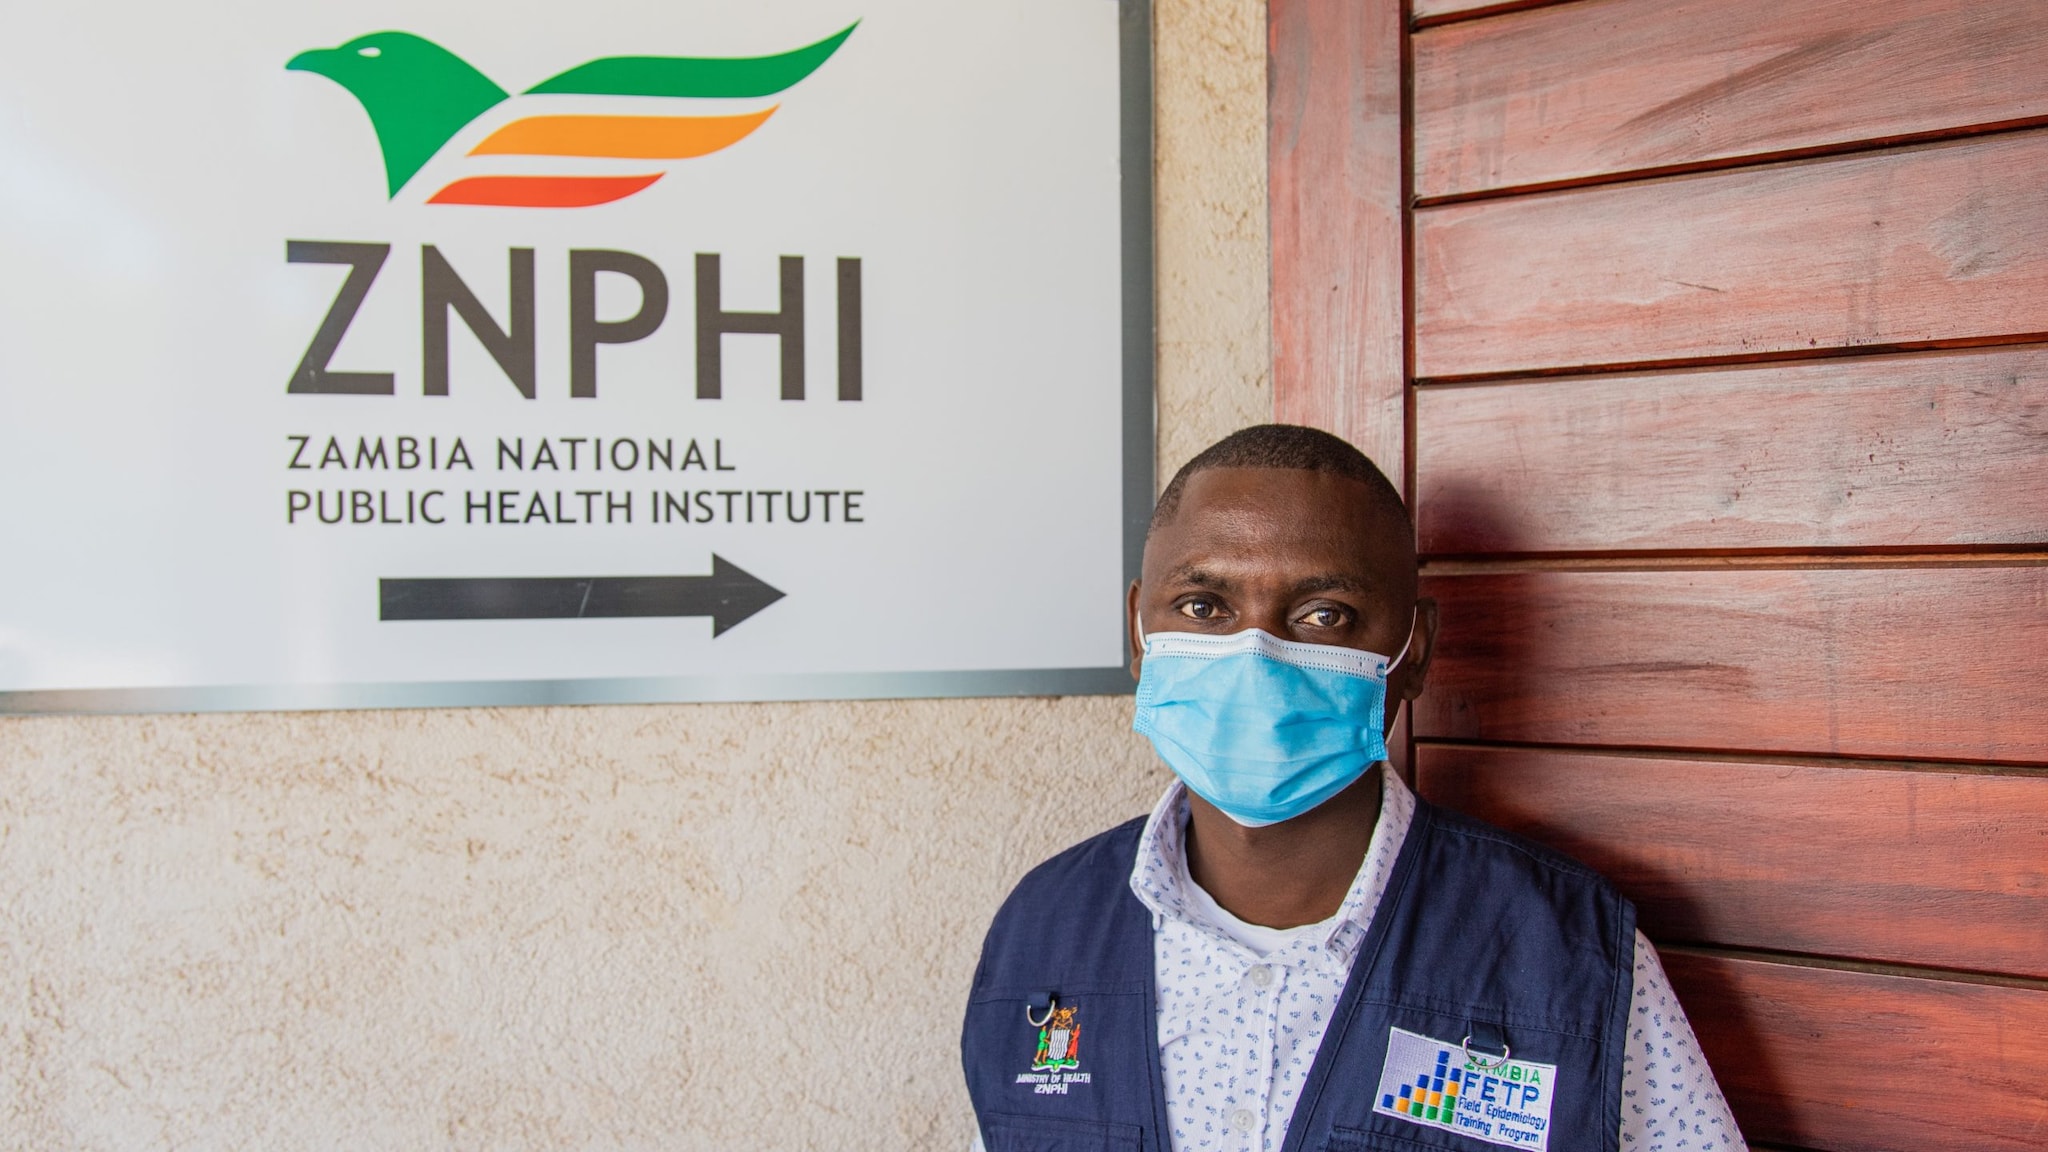 Man with a mask stands in front of ZNPHI signage.